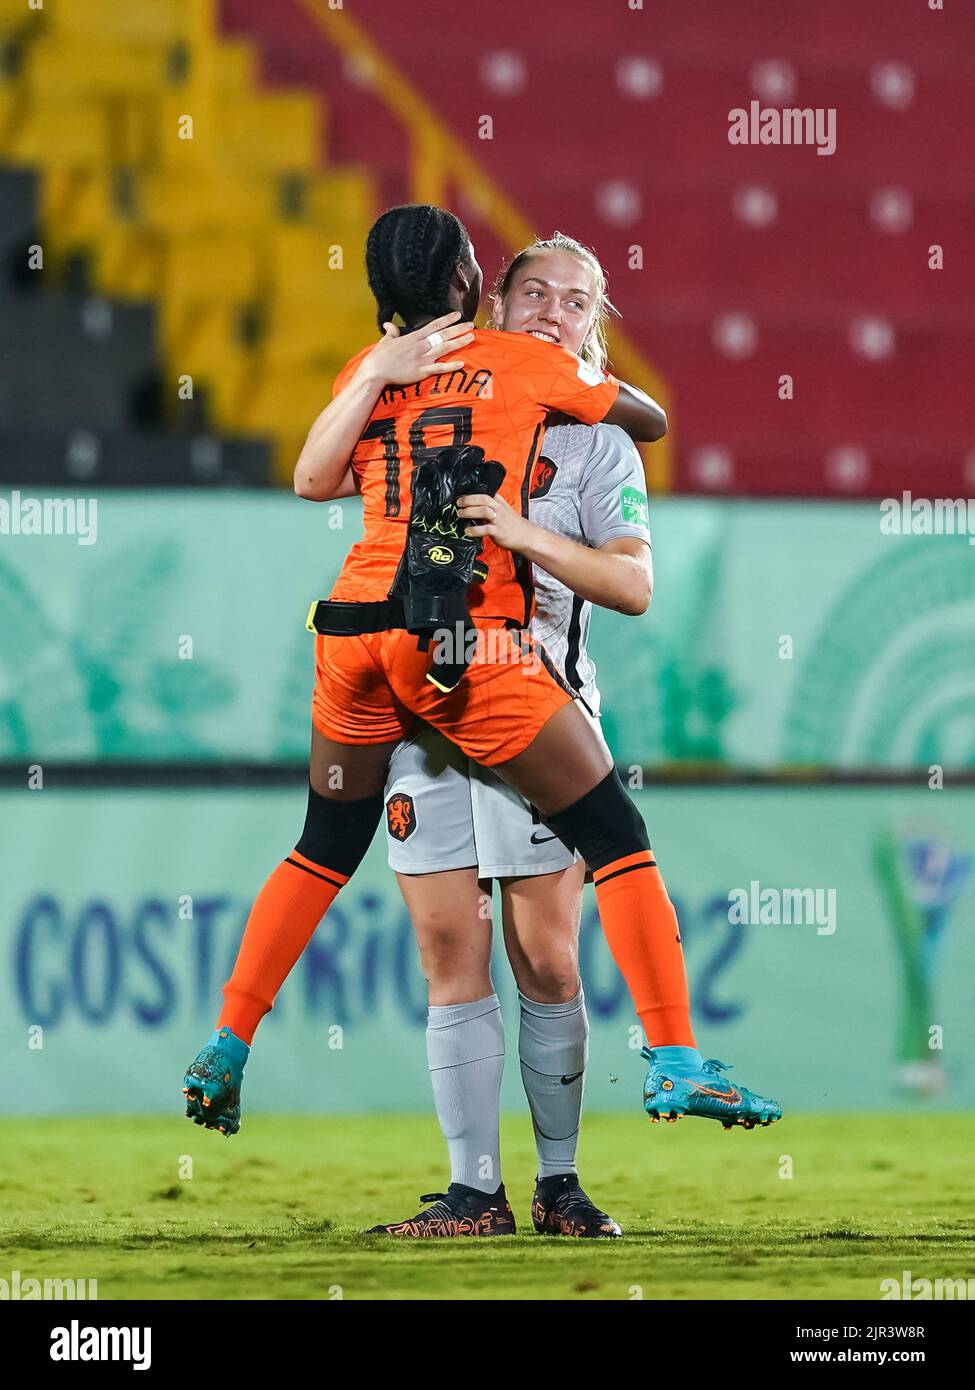 Alajuela, Costa Rica. 21st Aug, 2022. Alajuela, Costa Rica, August 21st 2022: Shi-Jona Martina (18 Netherlands) and goalkeeper Lisan Alkemade (16 Netherlands) celebrate their victory and entry into the semifinal during the FIFA U20 Womens World Cup Costa Rica 2022 quarterfinal football match between Nigeria and Netherlands at Morera Soto in Alajuela, Costa Rica. (Daniela Porcelli/SPP) Credit: SPP Sport Press Photo. /Alamy Live News Stock Photo